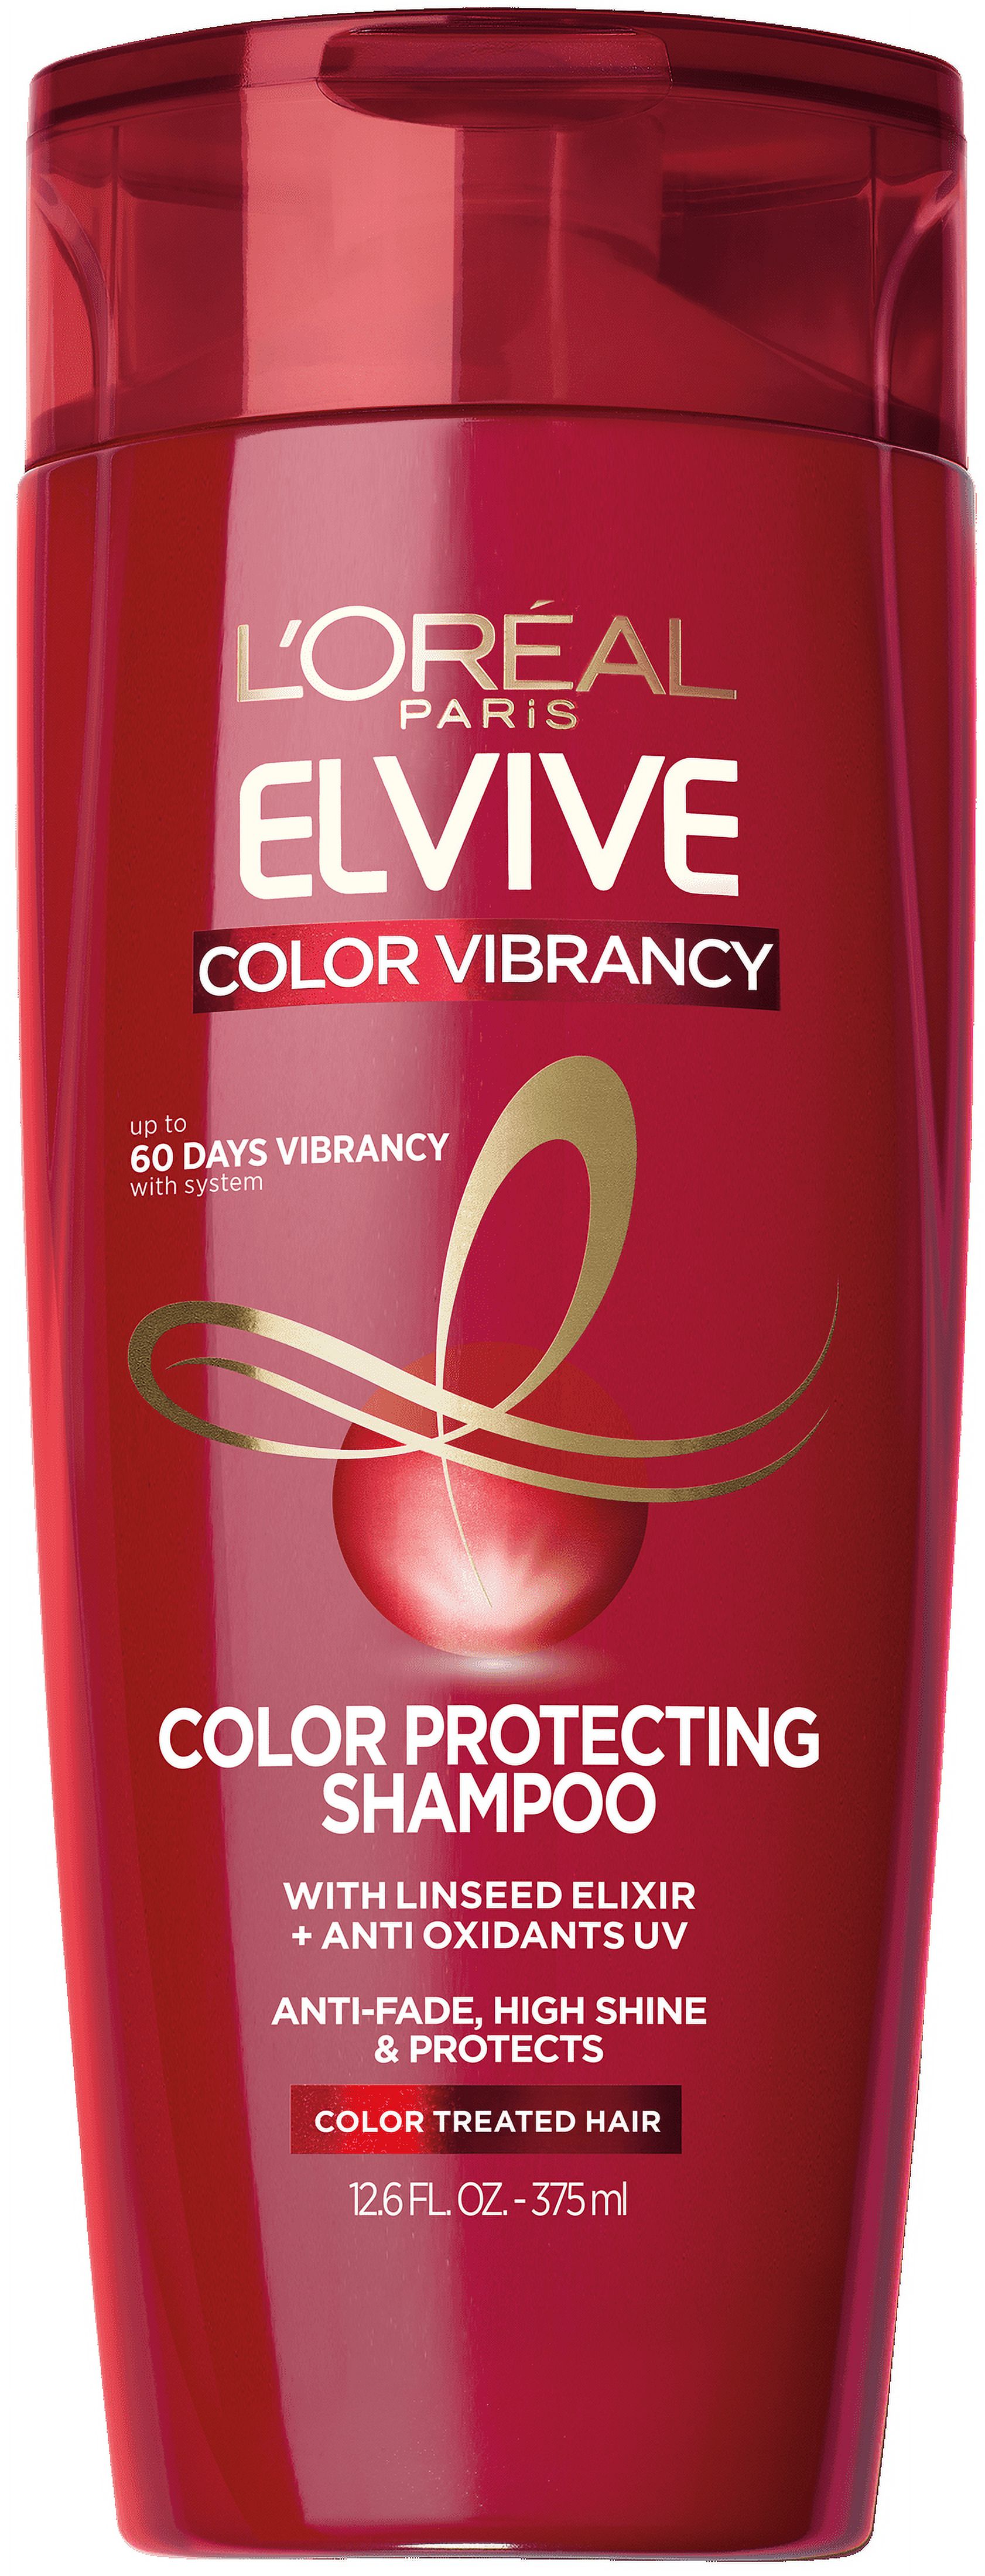 L'Oreal Paris Elvive Color Protecting Shampoo with Linseed, 12.6 fl oz - image 1 of 8